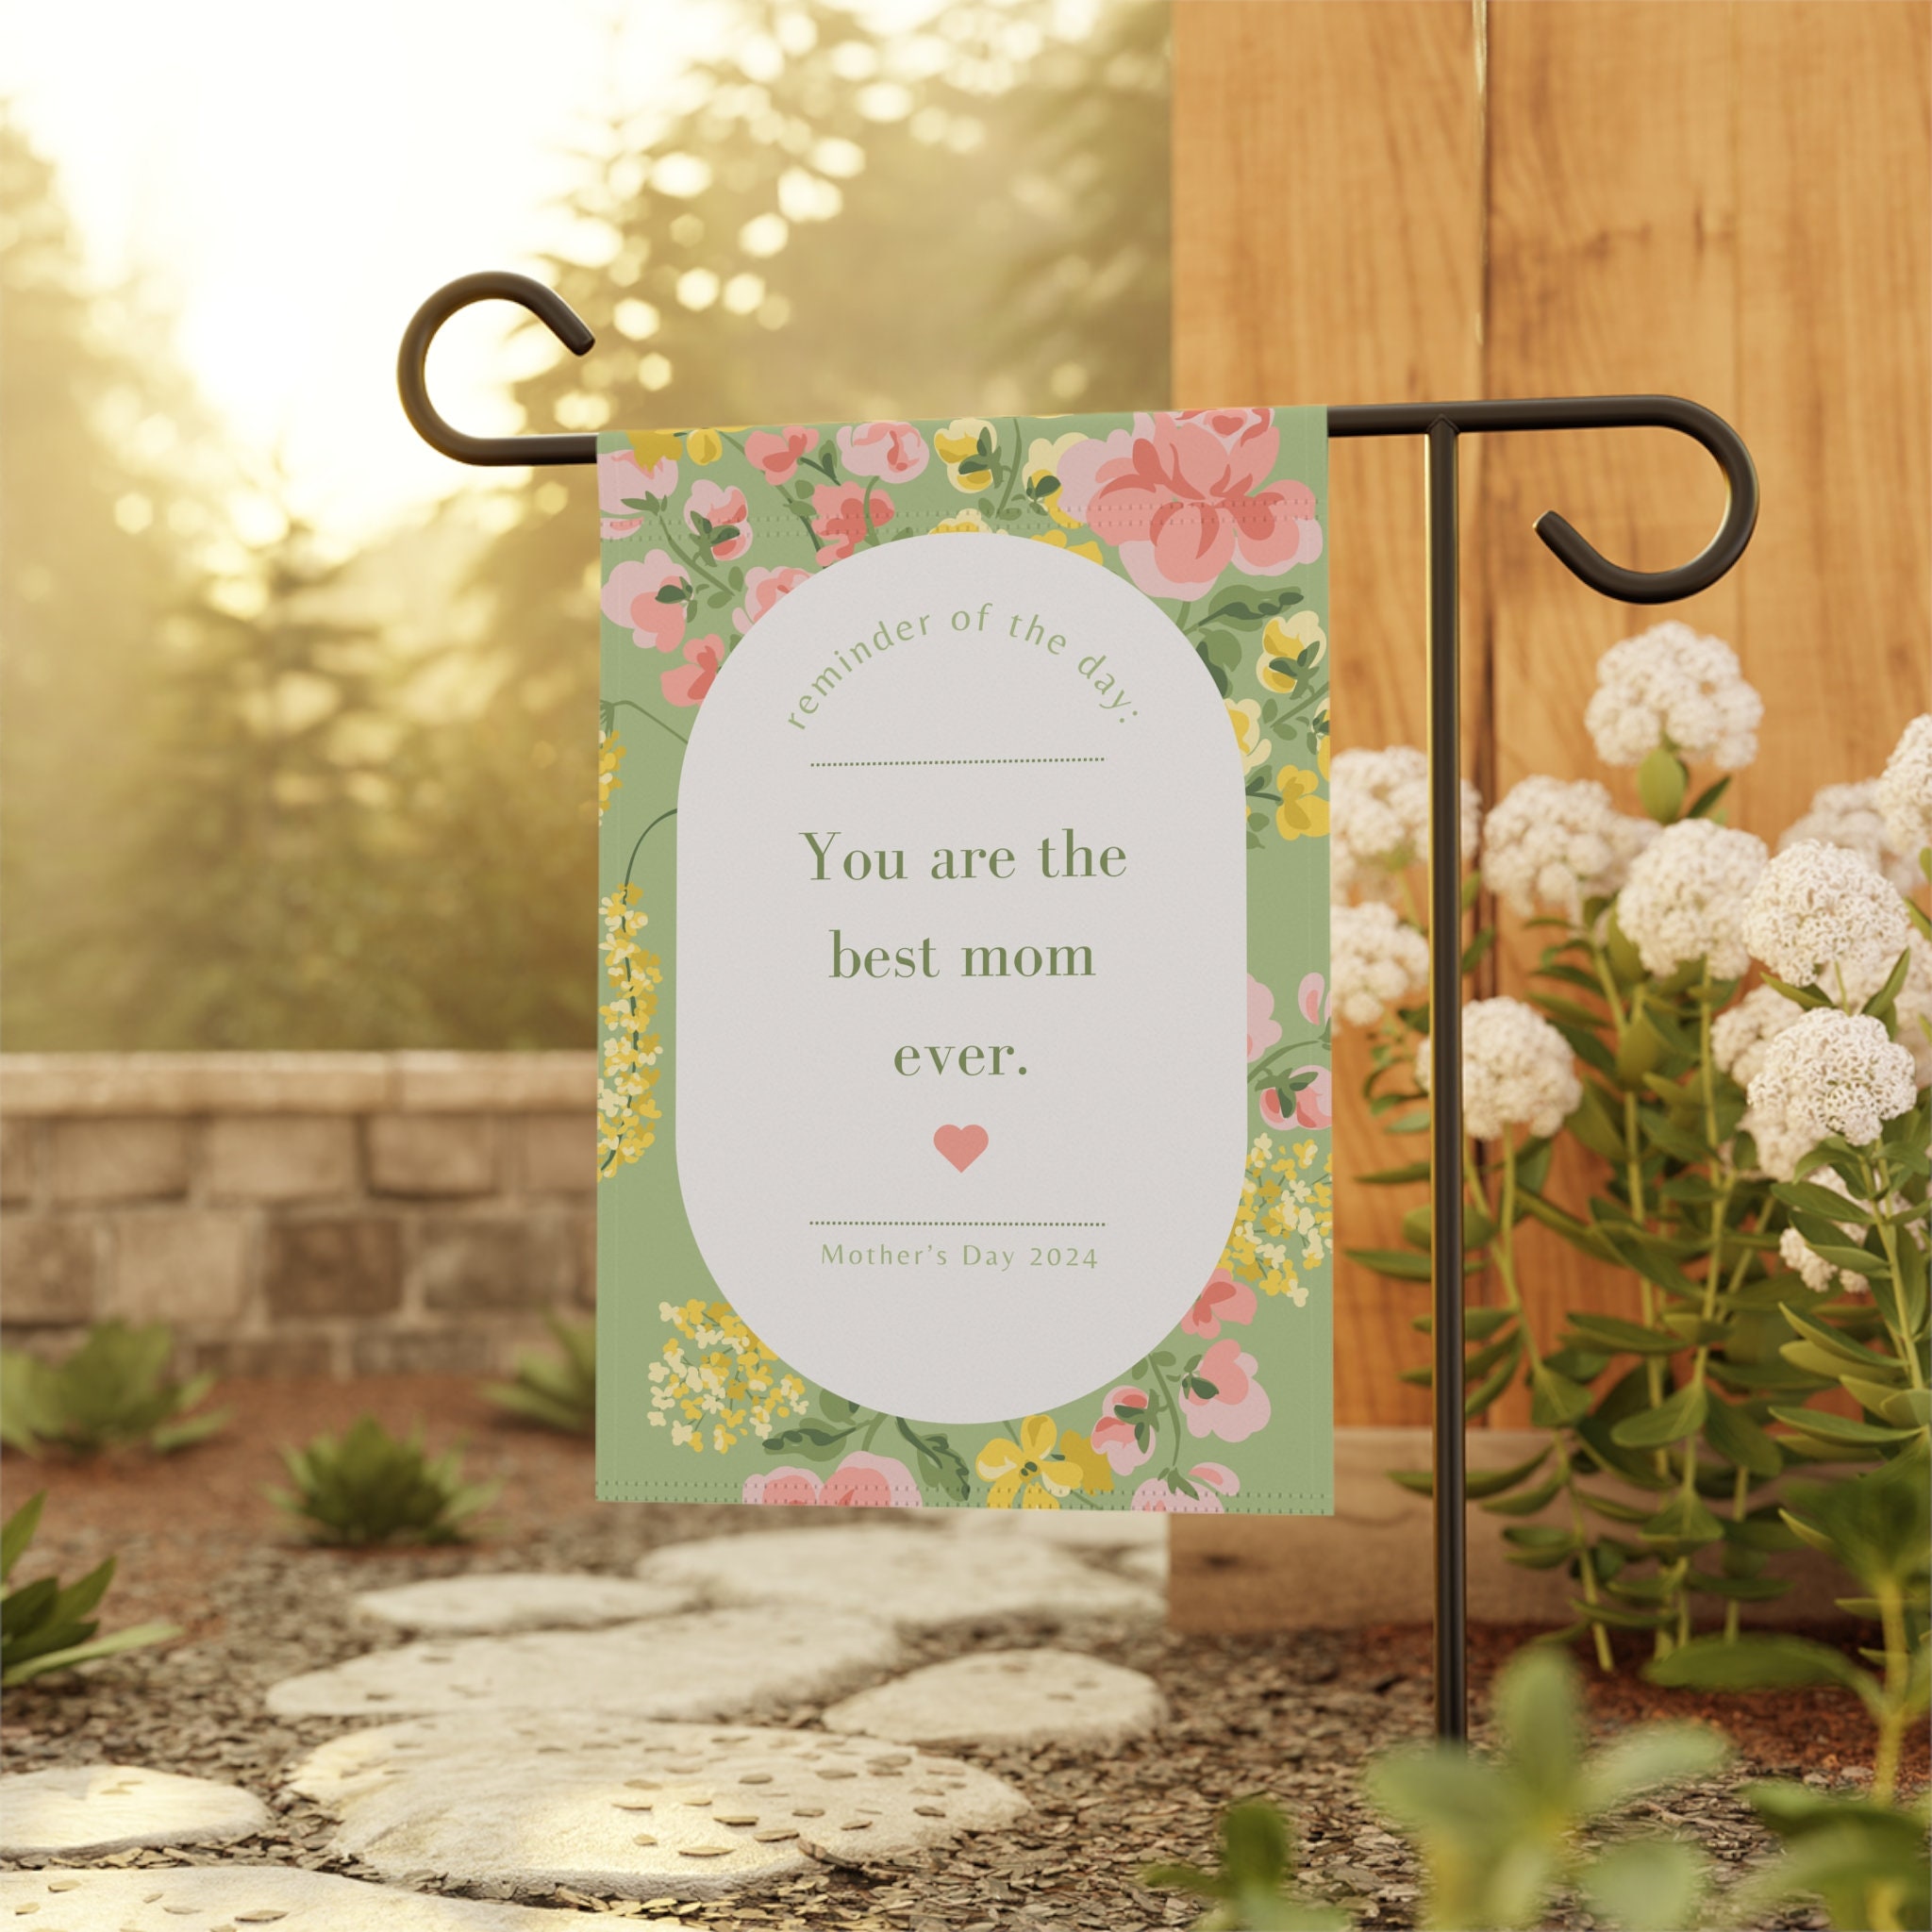 Mother's Day Garden Flag, Celebrate Mother's Day